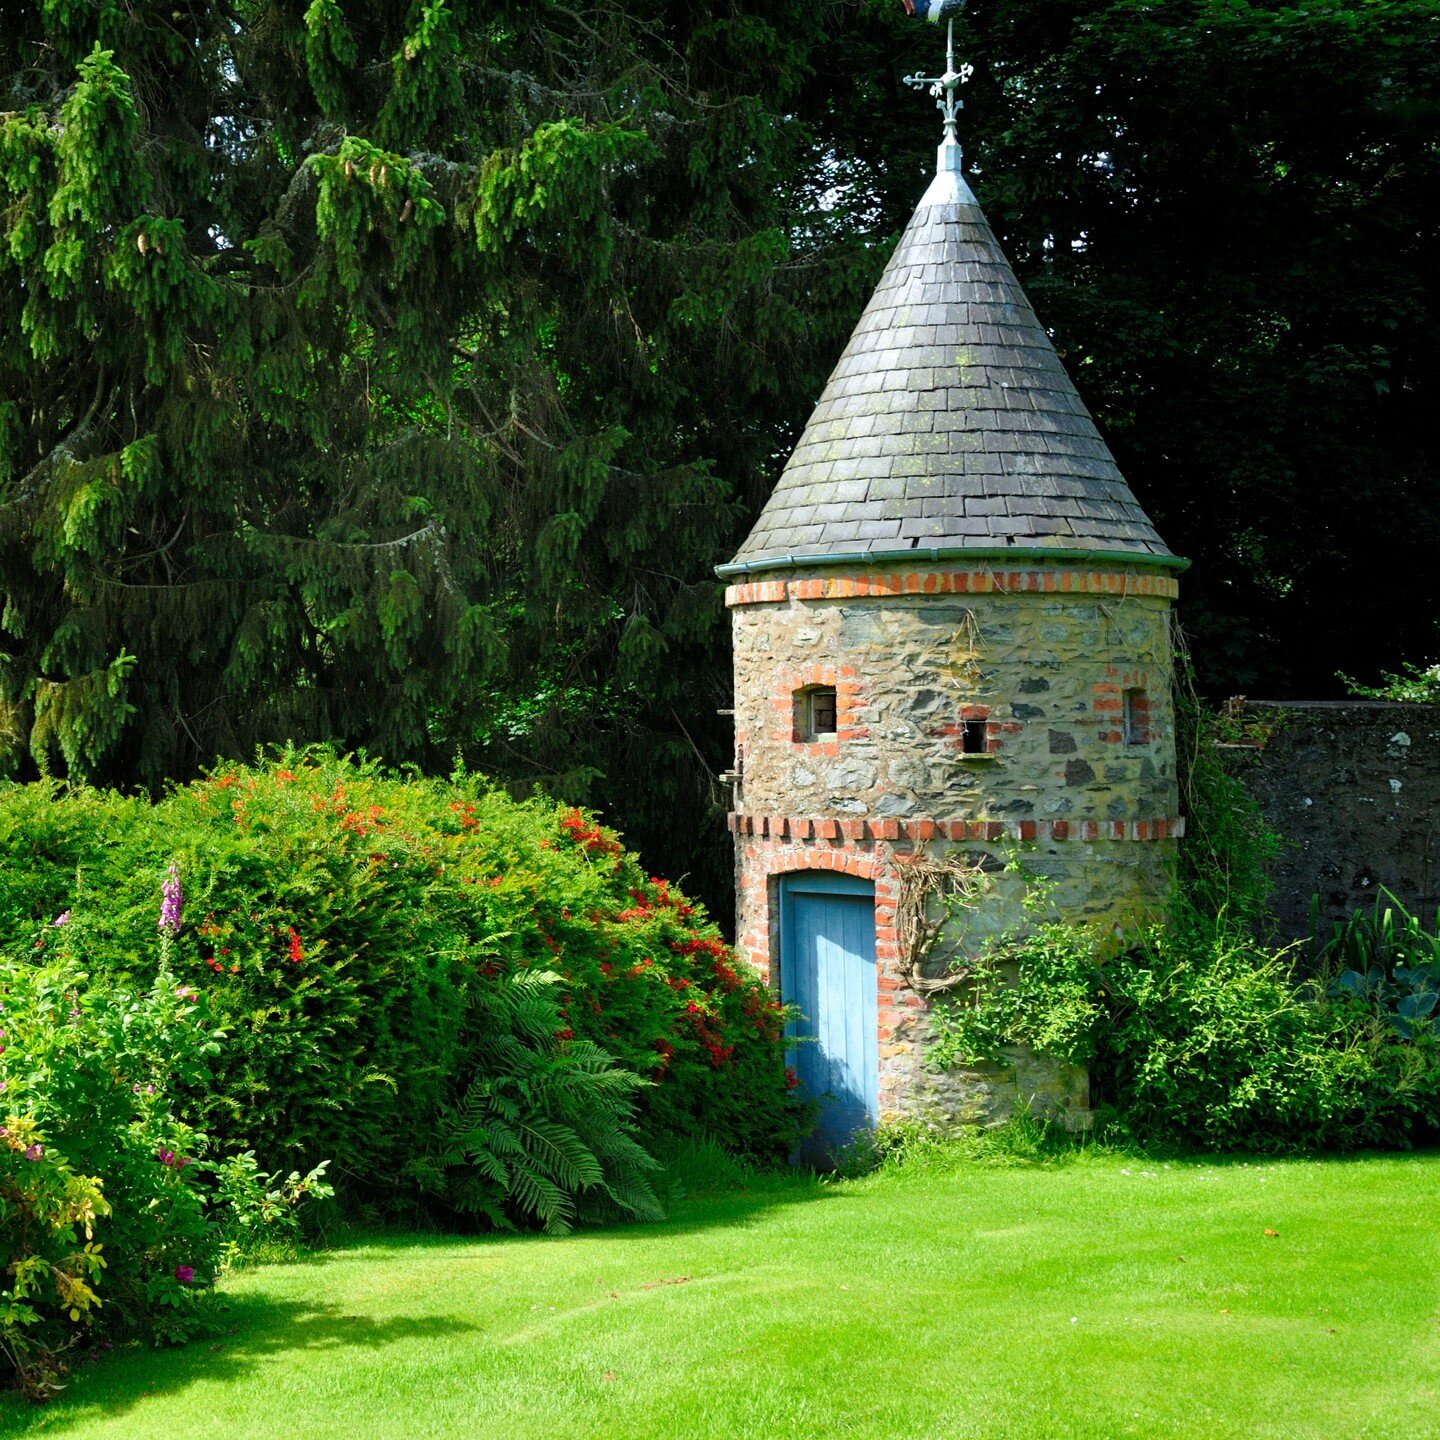 Doocots (or dovecots) are prominent features in the rural landscape of many parts of Scotland. In the 19th century such doocots were built to be generally incorporated into steadings or the gables of country houses. This is because pigeons provided a